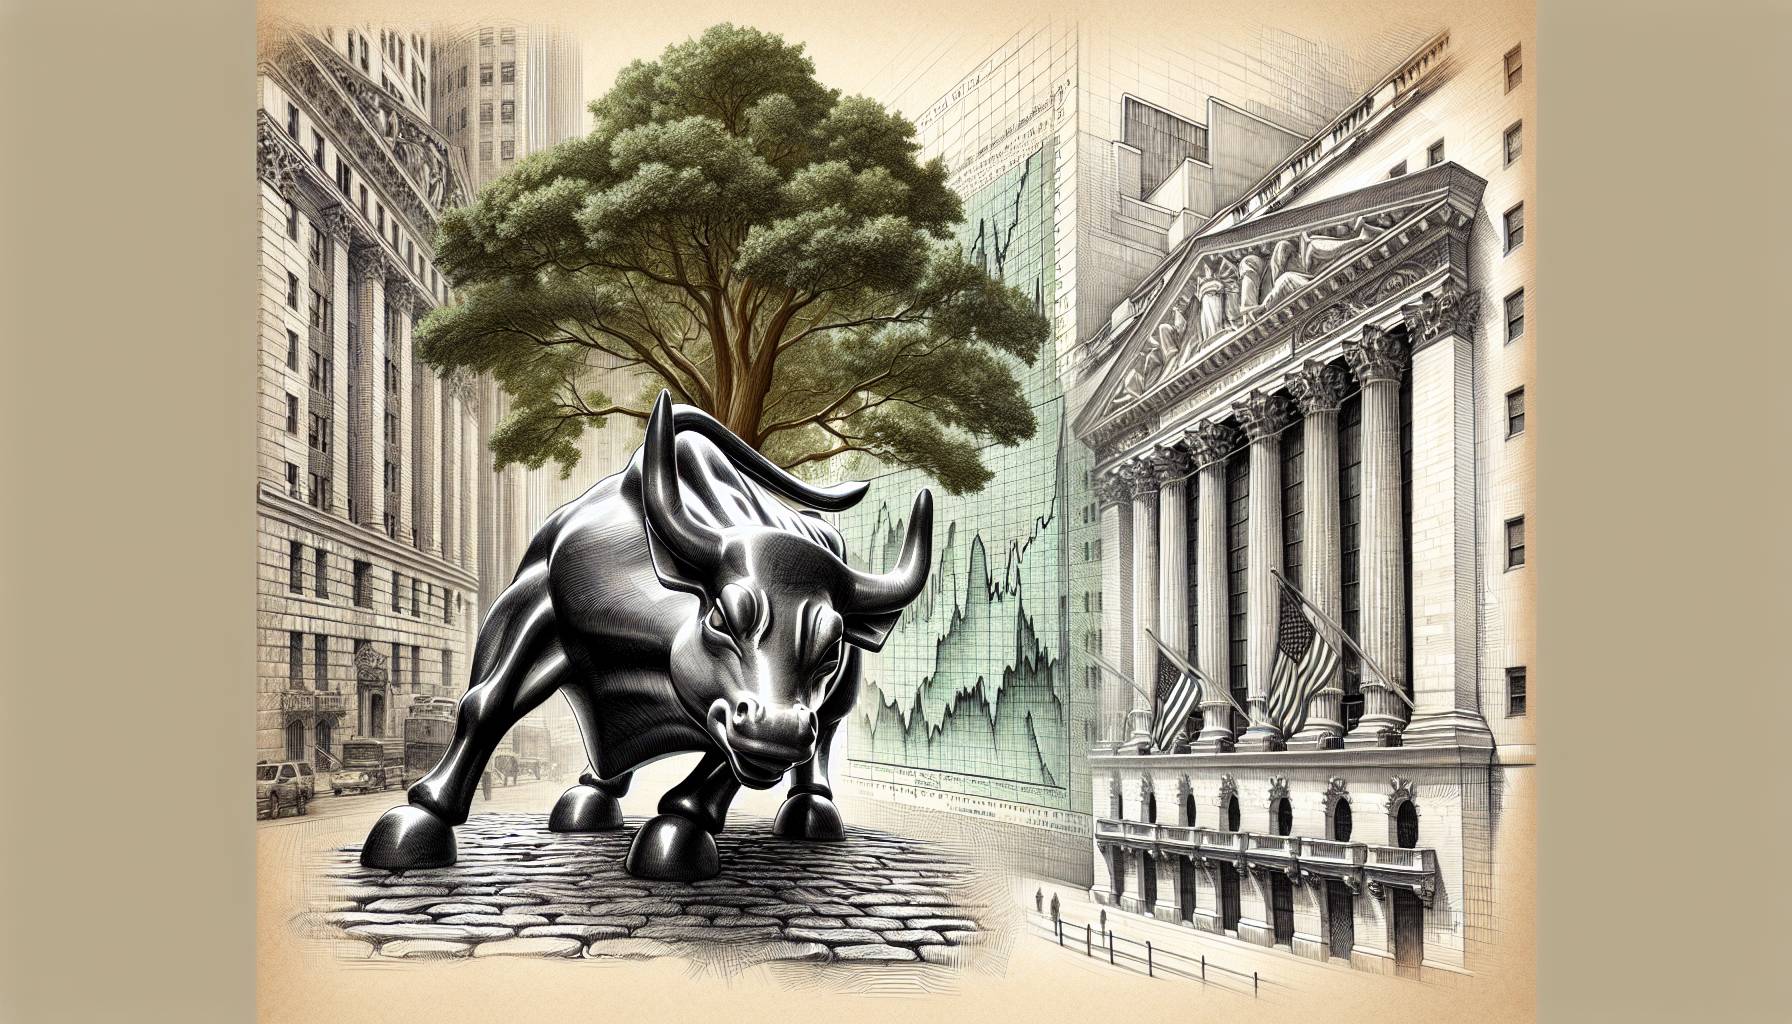 Stable Wall Street